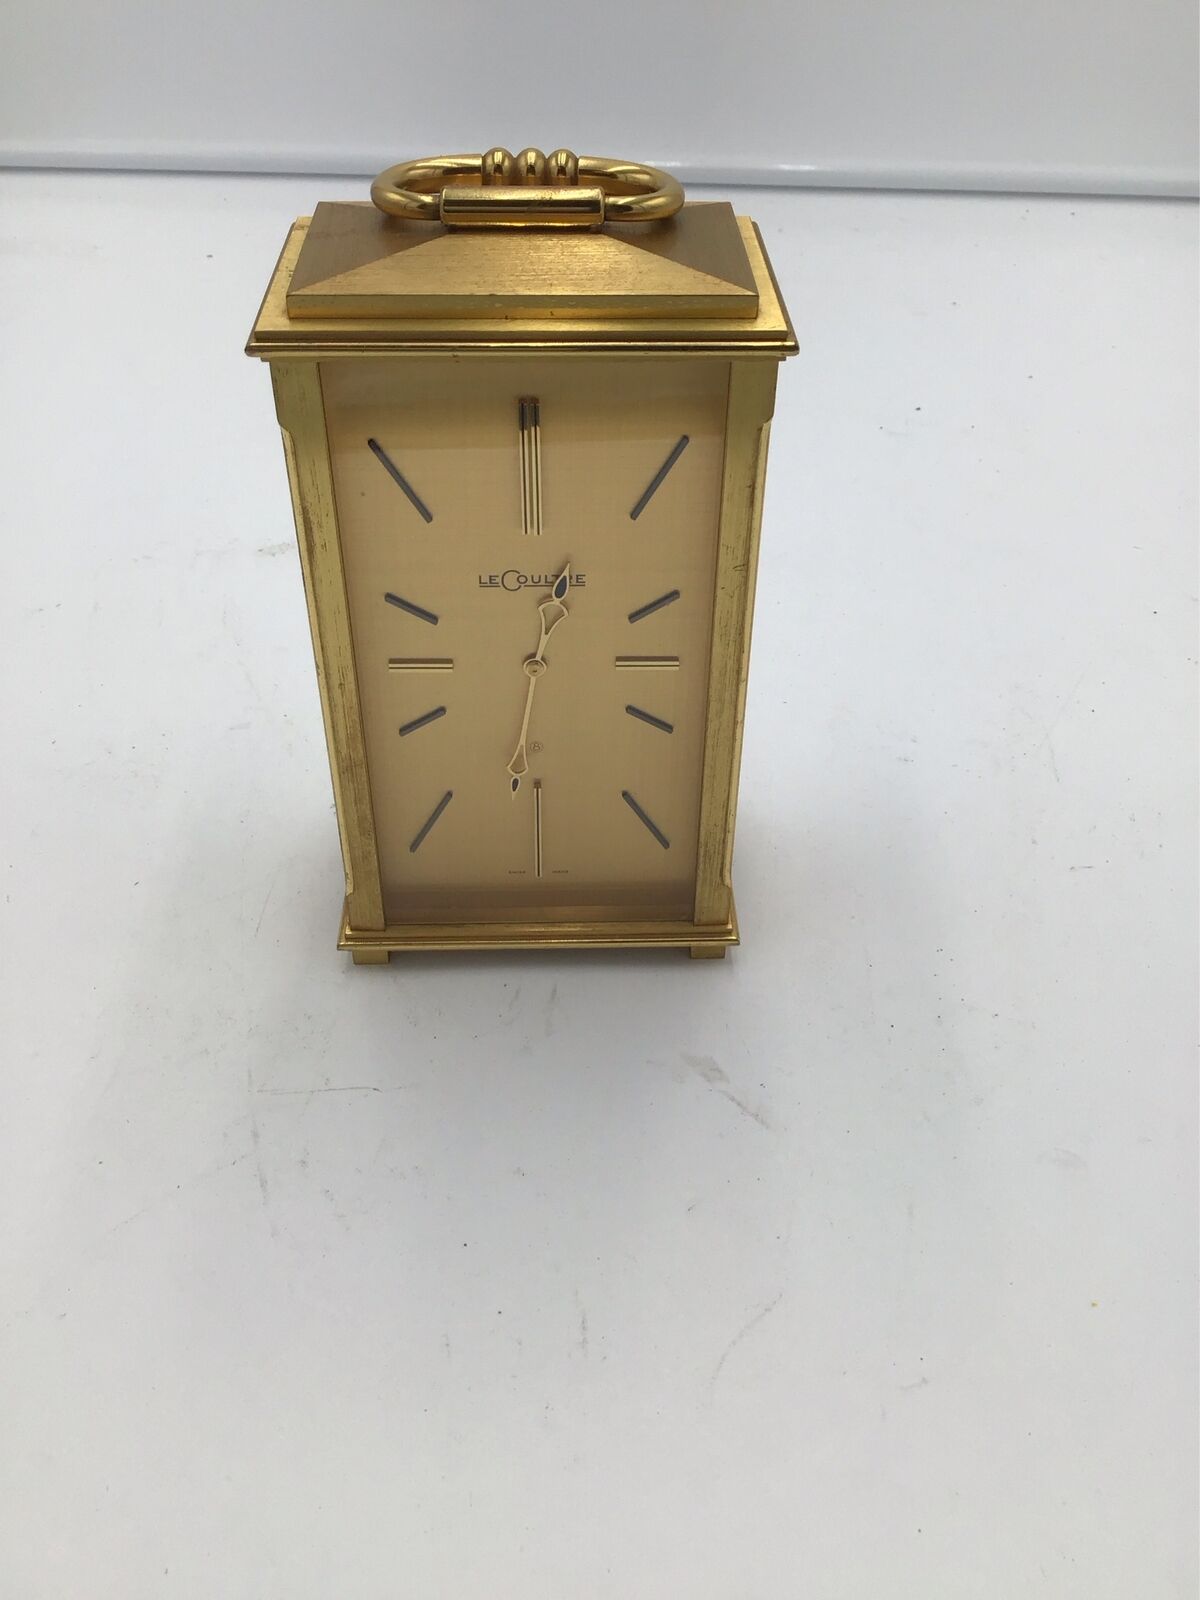 Jaeger Le Coultre 8 Day Brass Mantle Desk Carriage Clock W/ Red Side Not Runnin